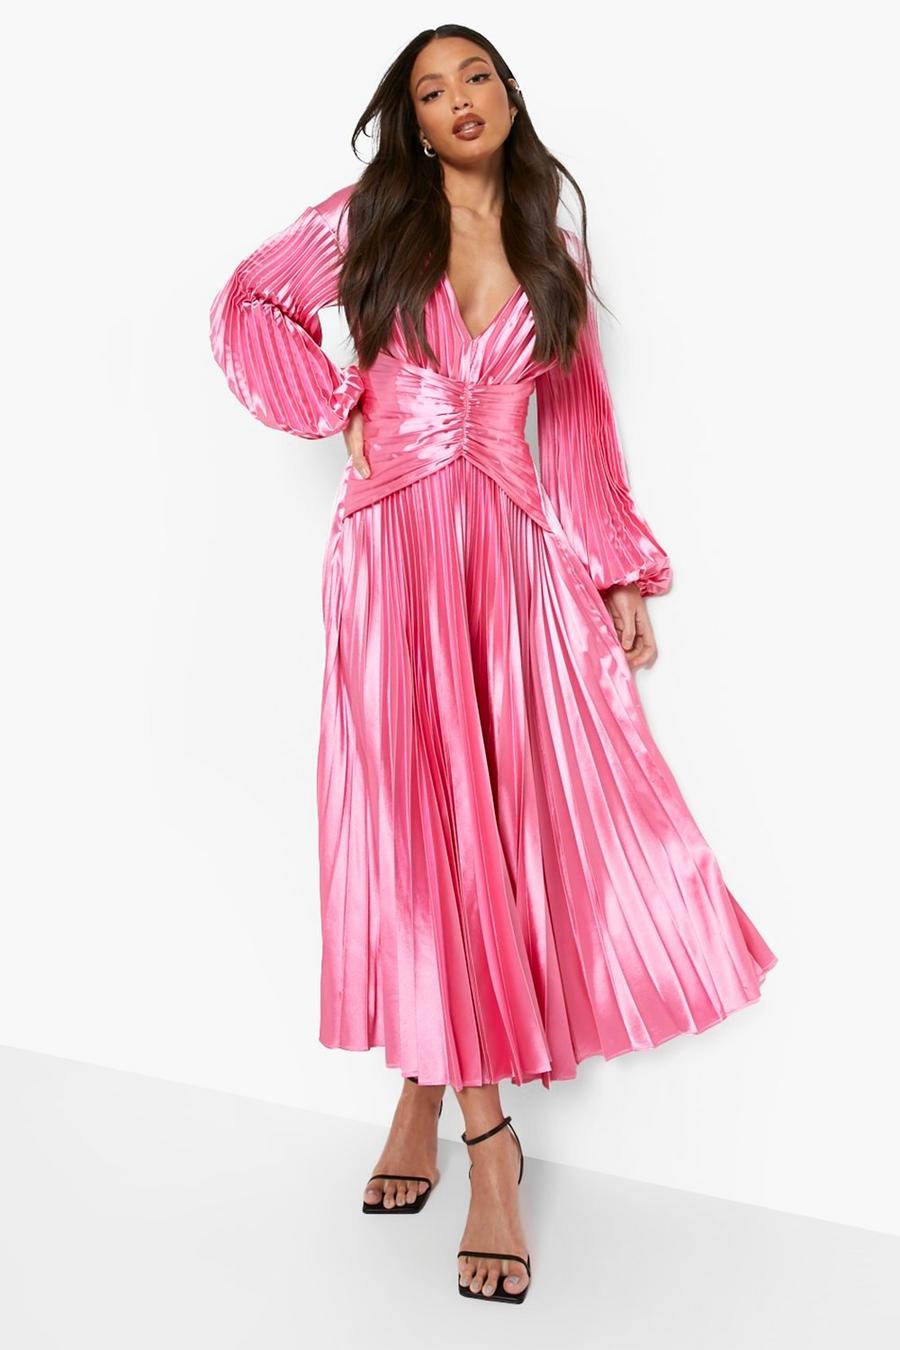 Boohoo Tall Pleated Satin Strappy Midi Dress in Hot Pink Womens Clothing Dresses Cocktail and party dresses Pink 